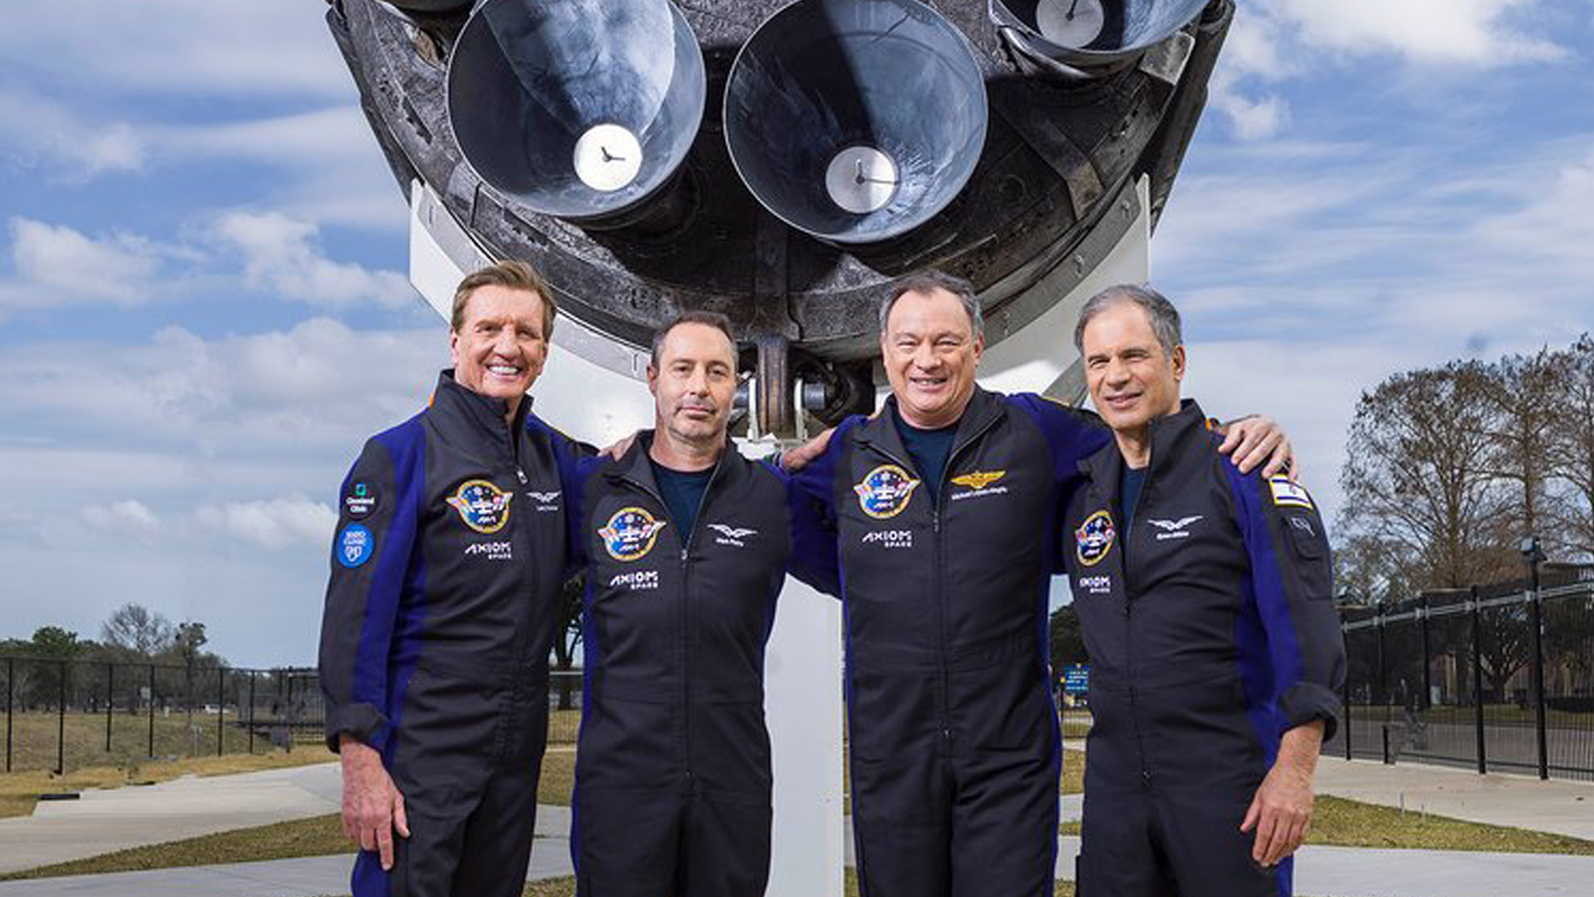 Axiom Space's private Ax-1 crew will fly to the International Space Station on a SpaceX spacecraft in April 2022.  They are (from left): Pilot Larry Connor;  Mark Pathy, Mission Specialist;  López-Alegria, commander;  and Eytan Stibbe, Mission Specialist.